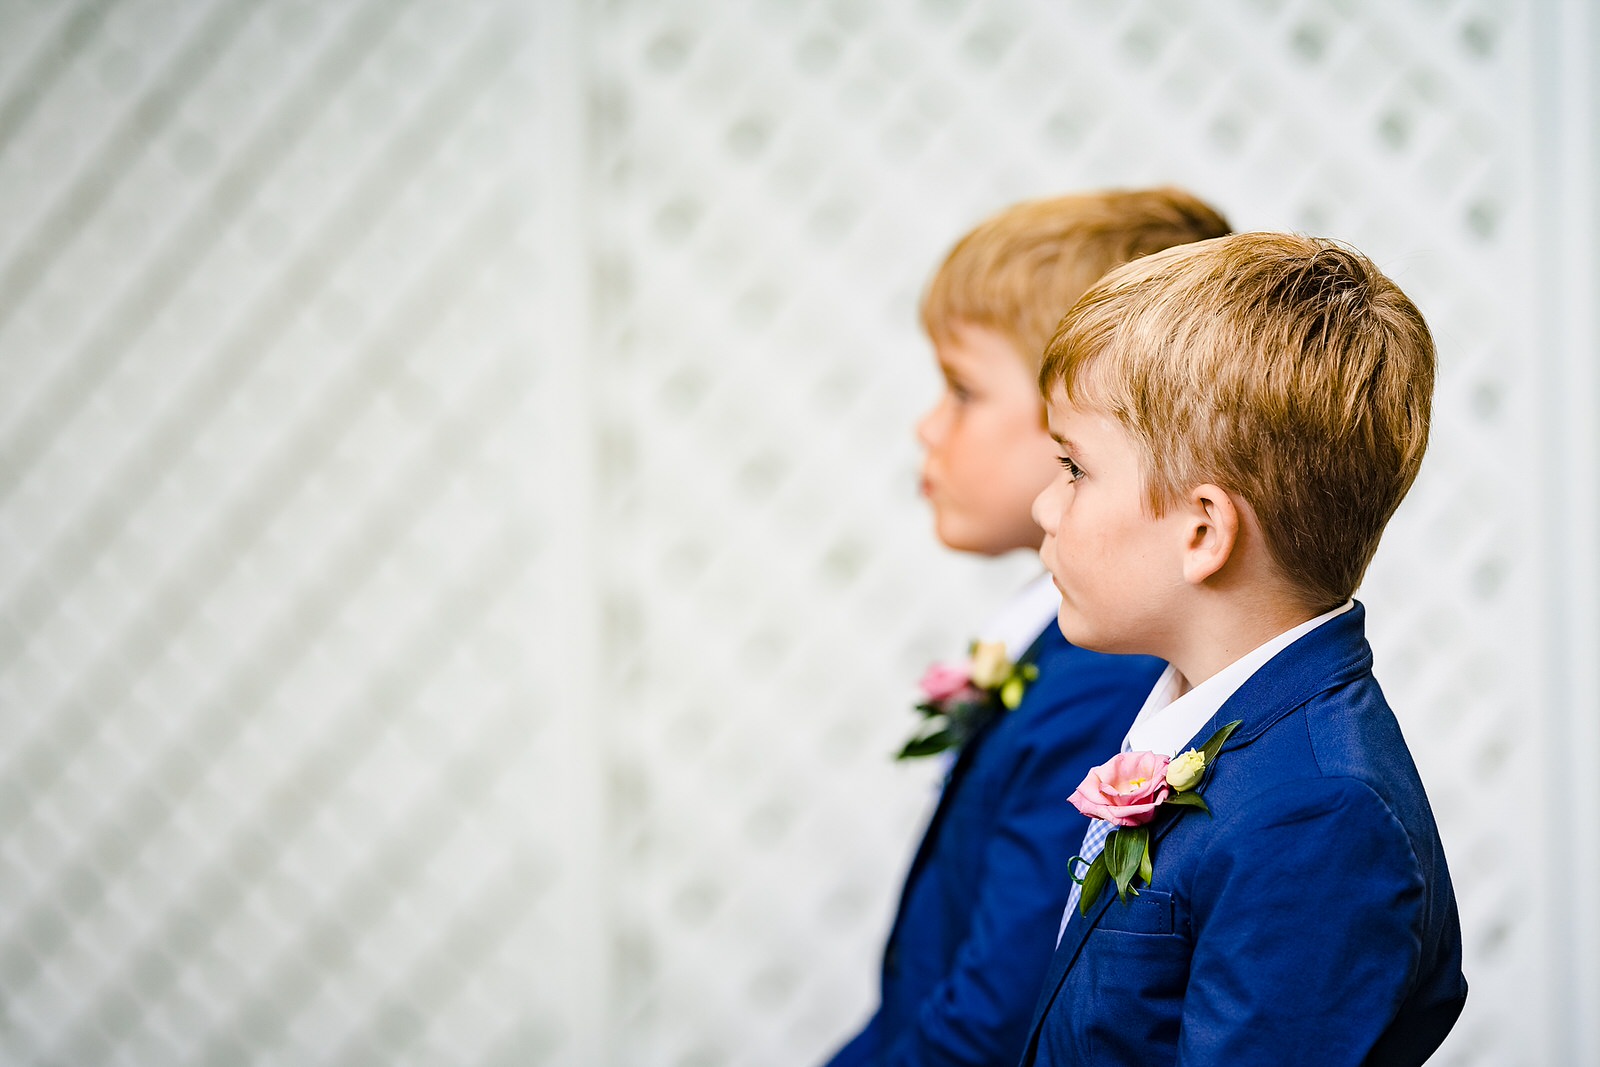 The groom's twin sons look on during the wedding ceremony